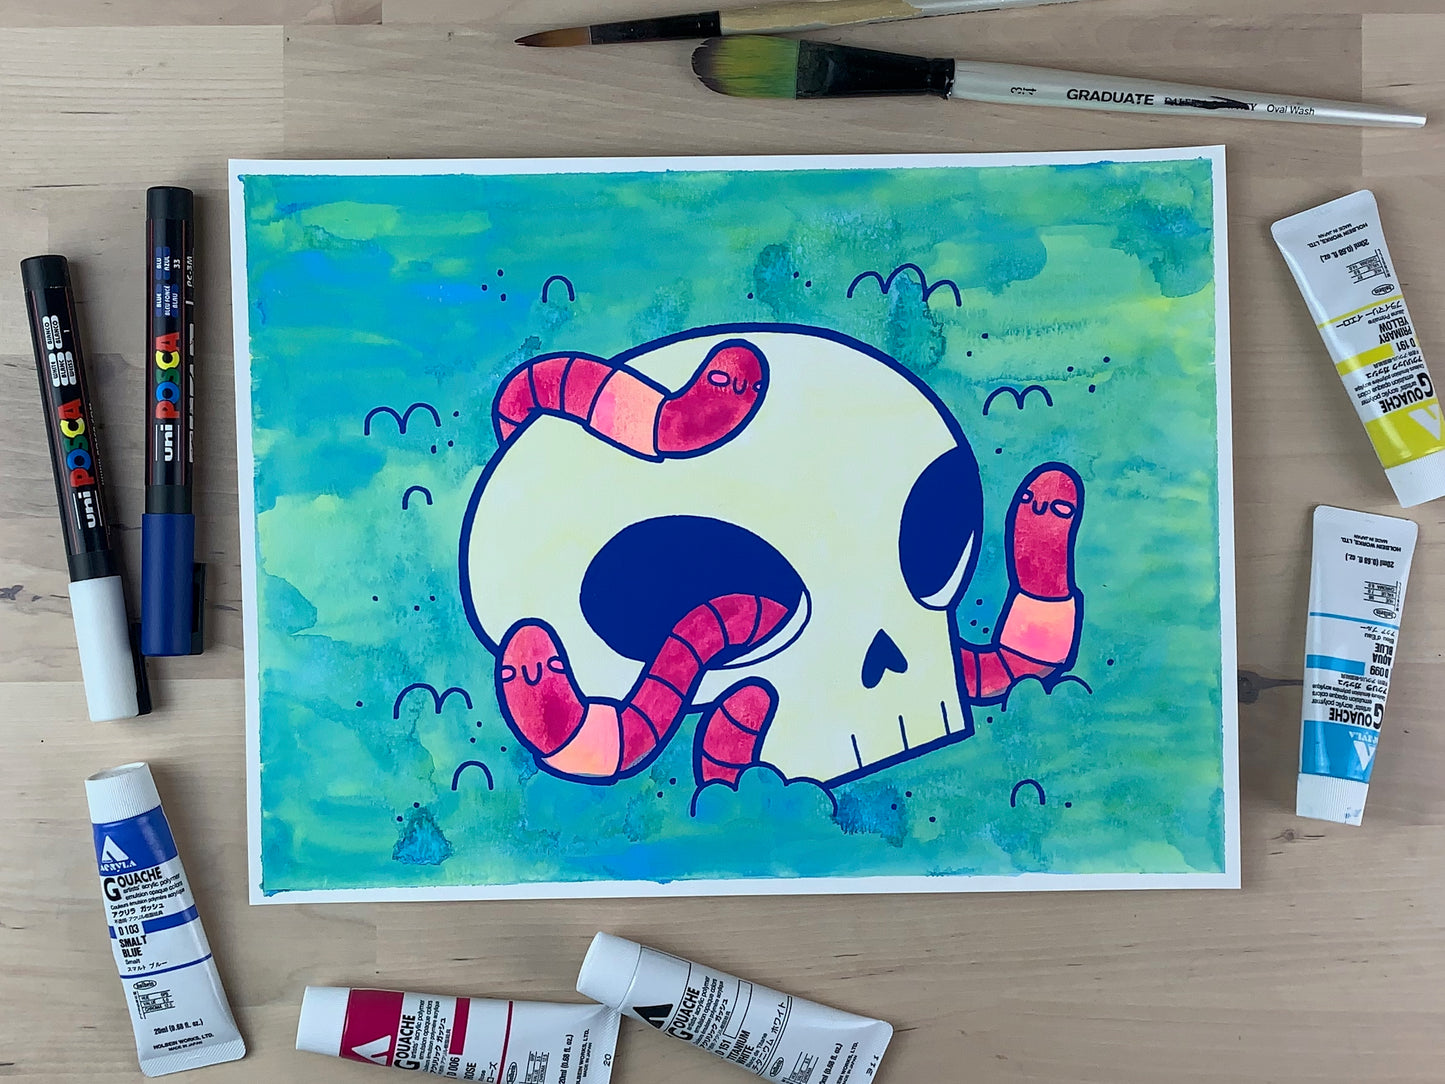 Painting of a skull in the dirt with three pink worms crawling around it.